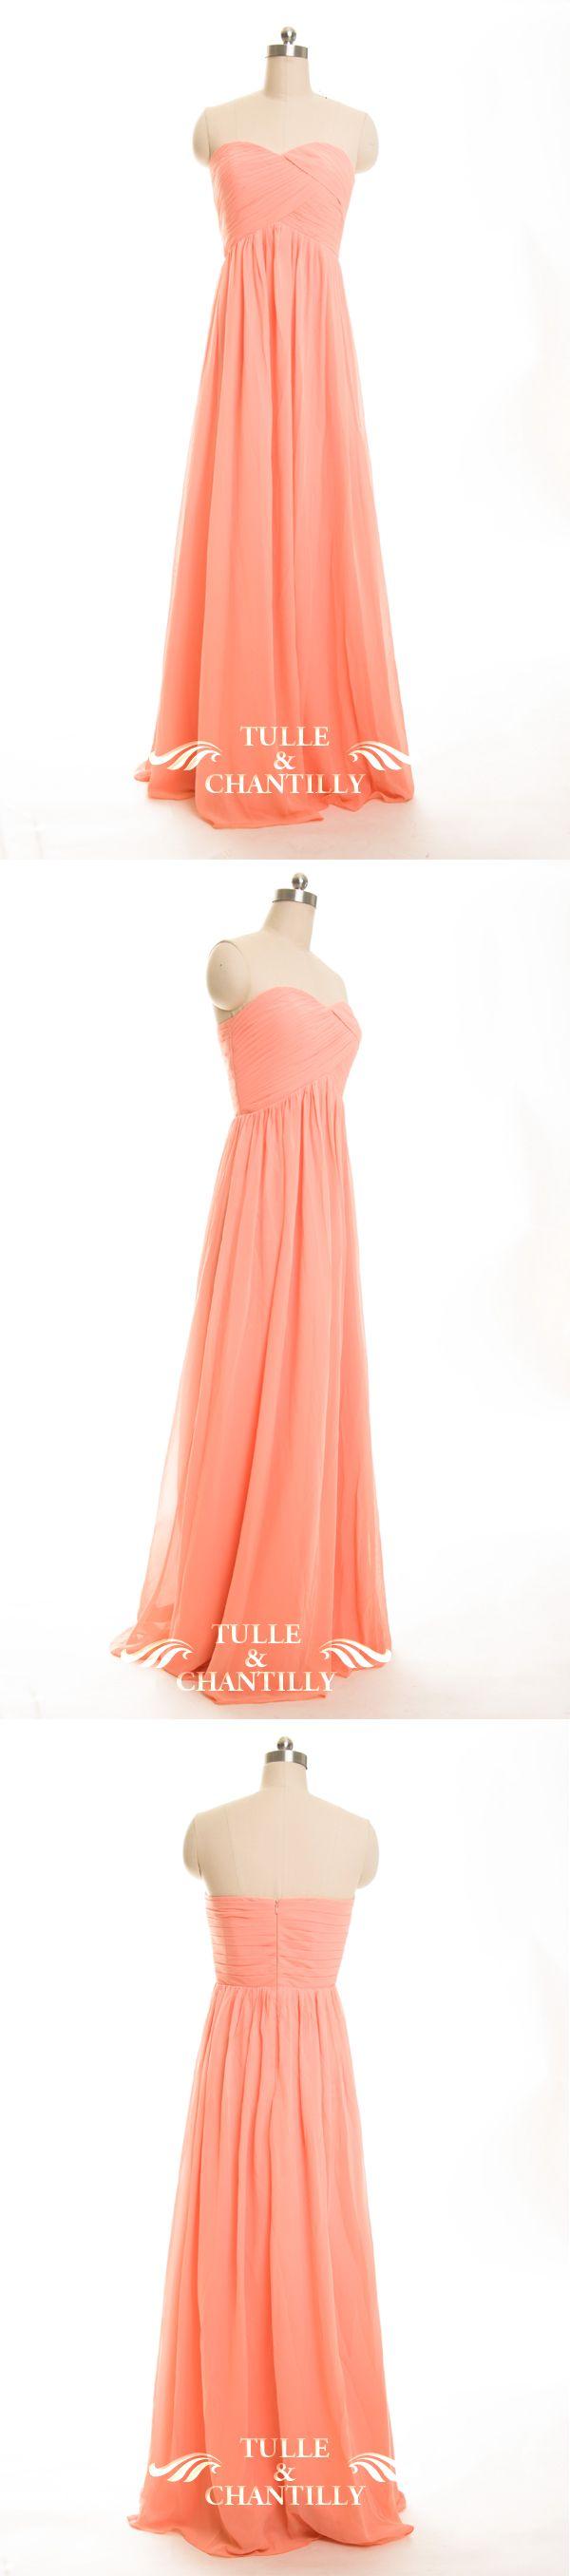 Mariage - Elegant Pink Colored Long Pleated Strapless Chiffon Bridesmaid Dress [TBQP268] - $155.00 : Custom Made Wedding, Prom, Evening Dresses Online